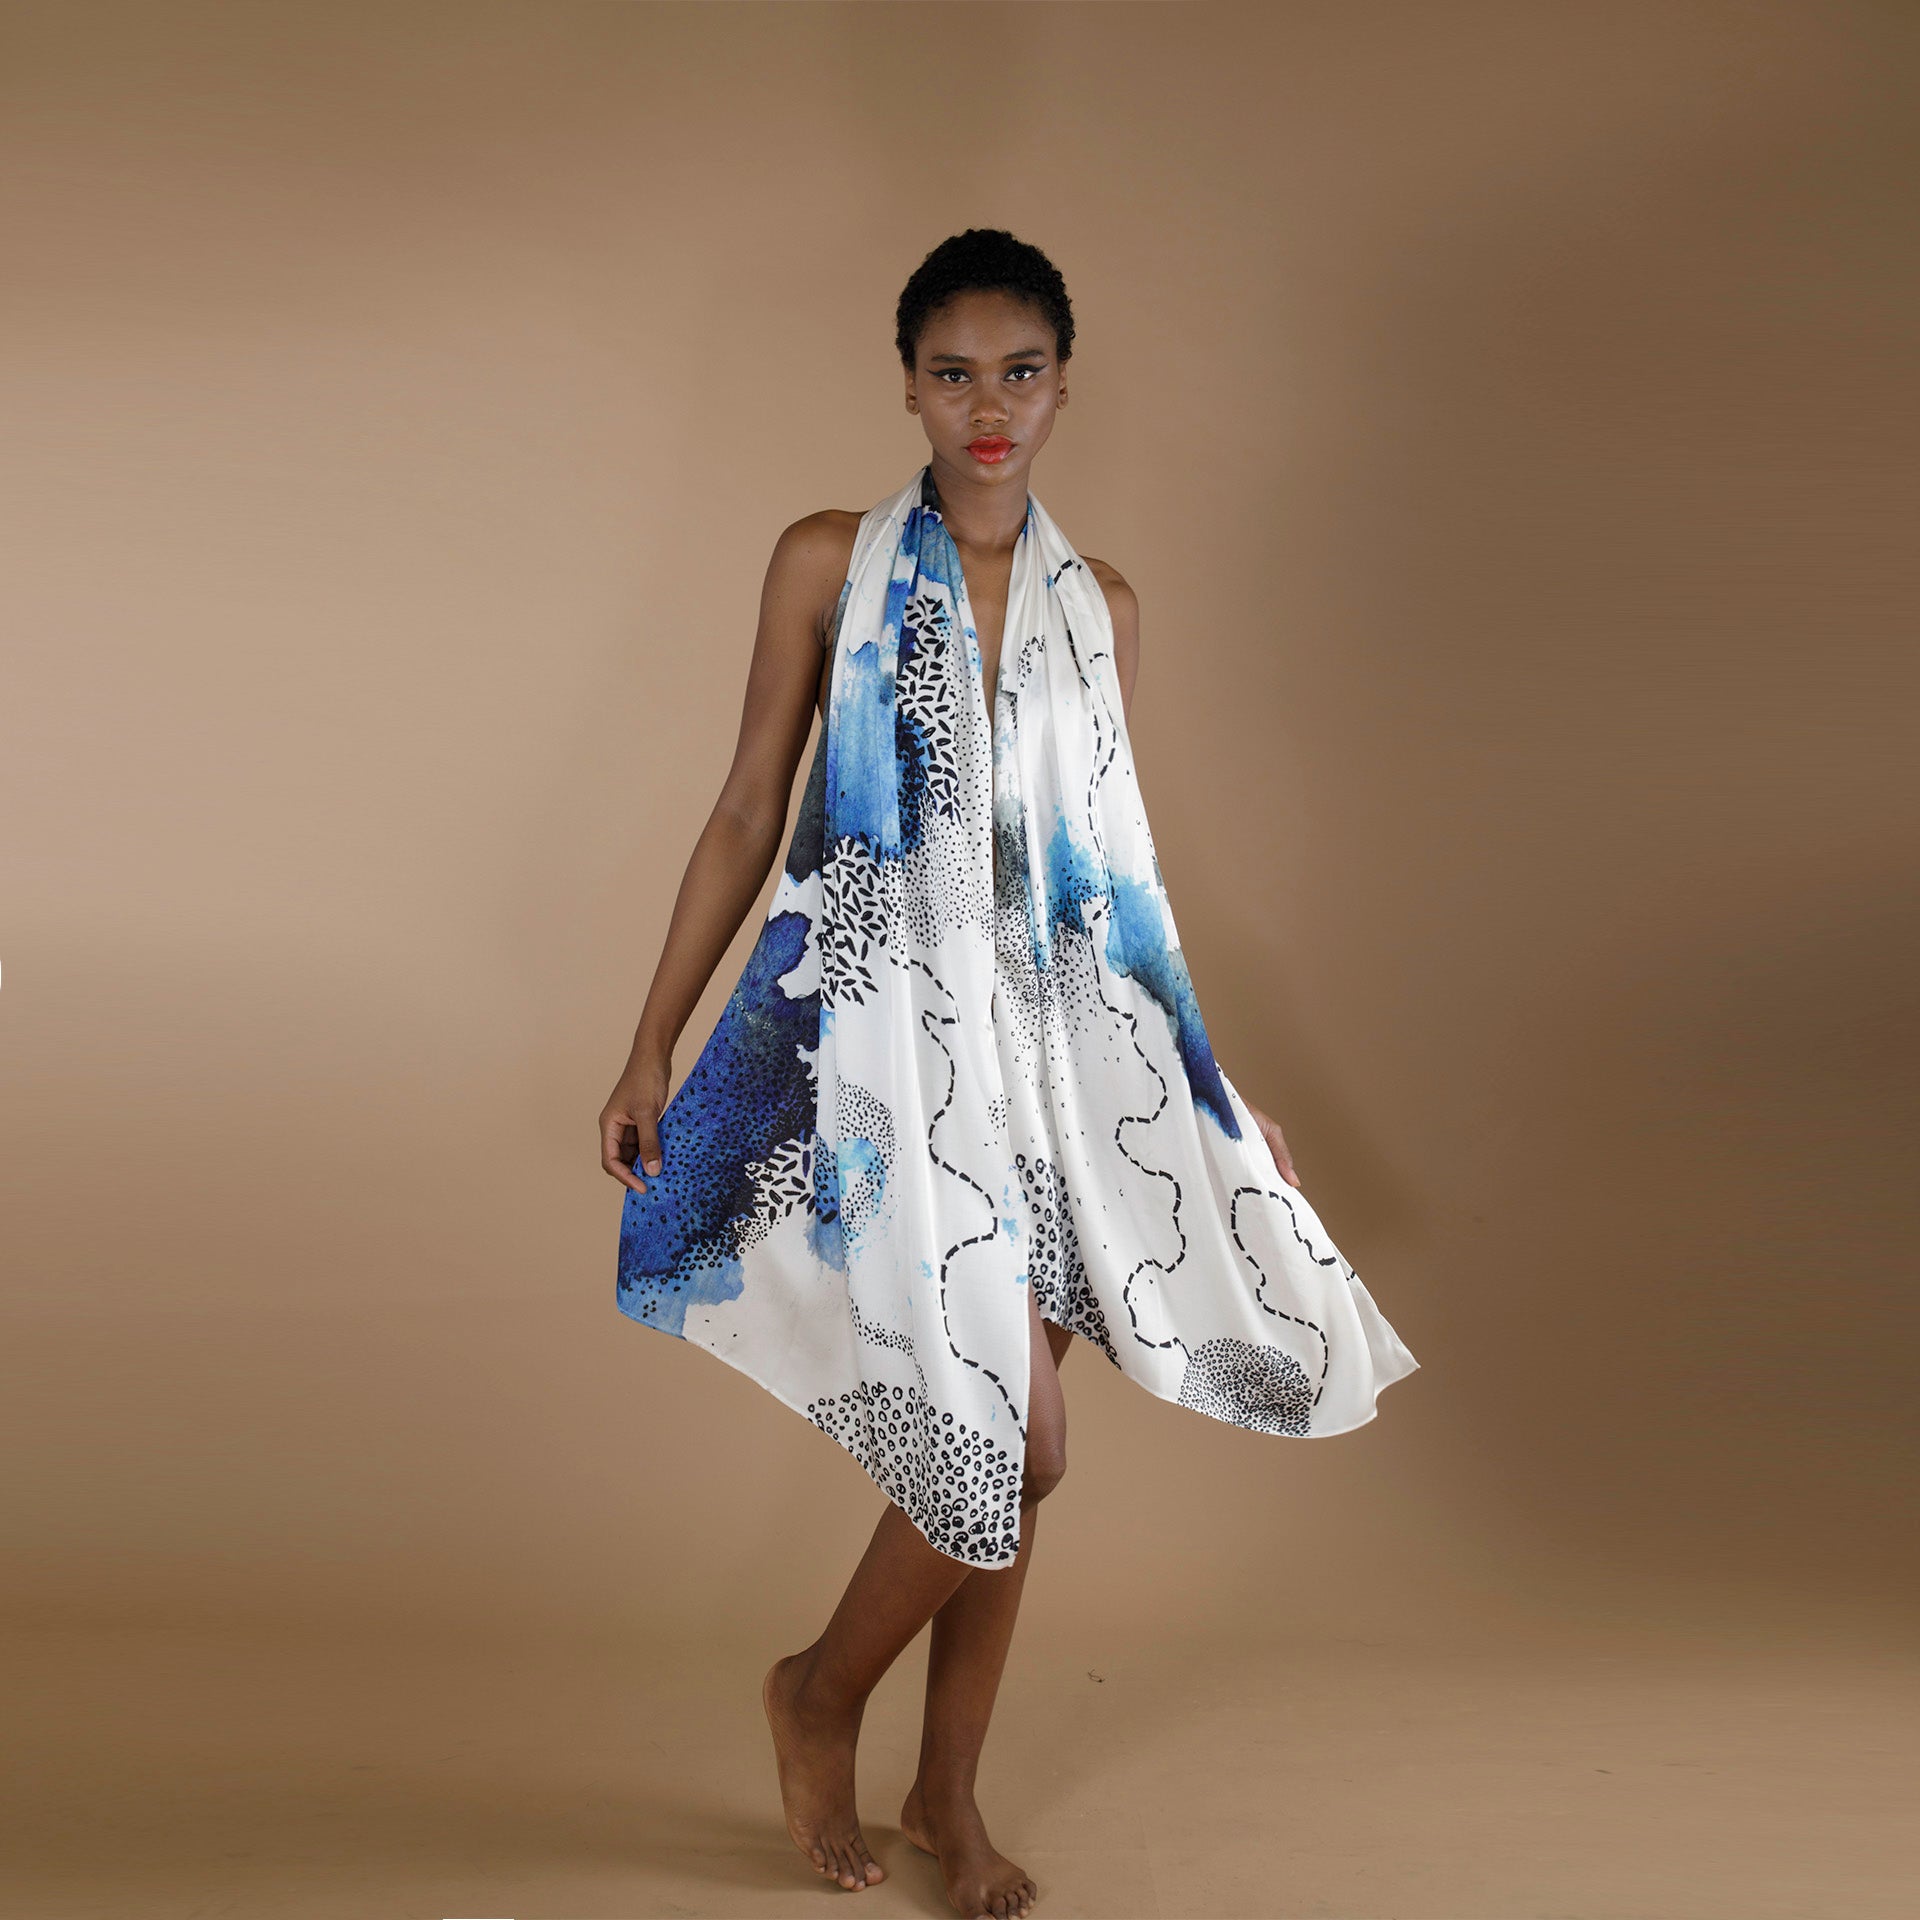 A Global small size model draped in a printed organic rose petal silk fabric. The scarf is printed on a white base with blue and black print inspired from our botanical geometry collection.